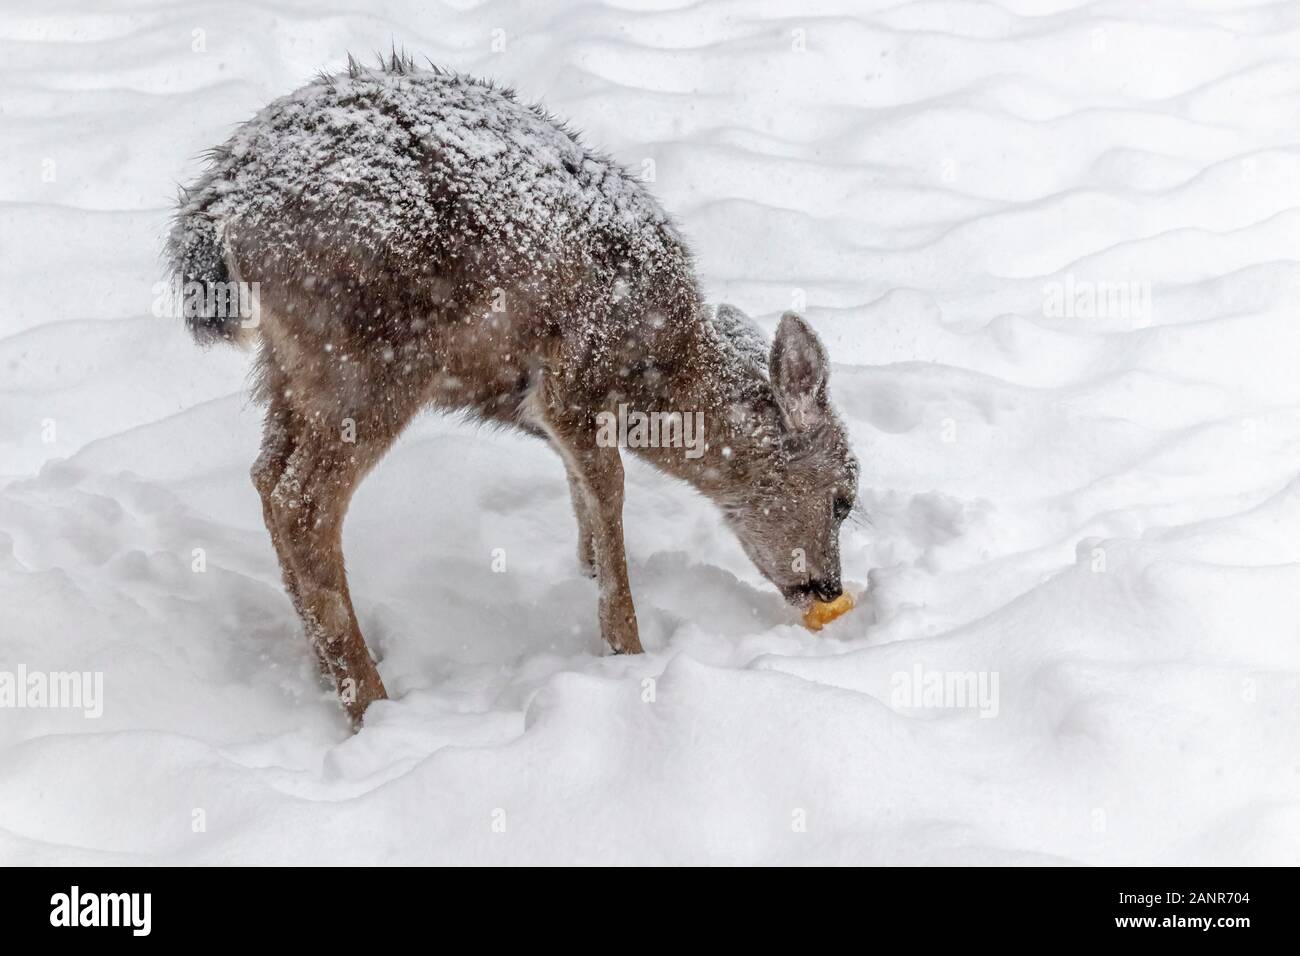 A lone Blacktail deer fawn stands in the snow, hunched up against the cold, its fur coat covered in snowflakes, eating an apple. Stock Photo